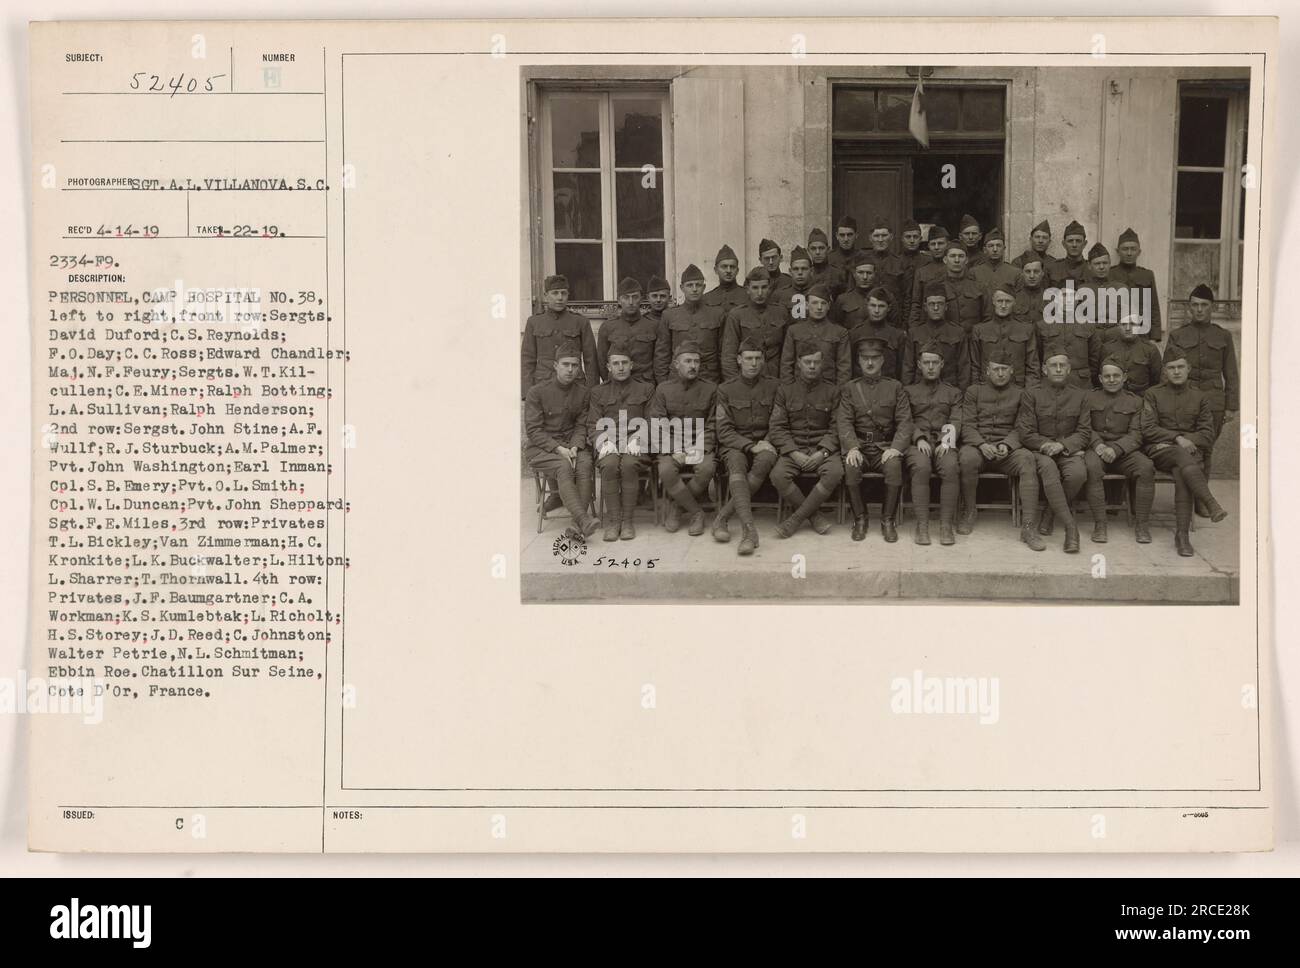 Personnel from Camp Hospital No. 38 in Chatillon sur Seine, Cote d'Or, France, are pictured in this photo. The individuals in the photo are identified as follows: in the front row from left to right - Sergte, David Duford; C. S. Reynolds; F.O.Day; C. C. Ross; Edward Chandlers Maj. N. P. Feury; Sergts. W. T. K11-cullen; C. E. Miner; Ralph Botting; L.A. Sullivan; Ralph Henderson. In the second row - Sergst. John Stine; A. F. Wullf; R. J. Sturbuck; A. M. Palmer; Pvt. John Washington; Earl Inman; Cpl.S.B. Emery; Pvt. 0.L. Smith; Cpl. W. L. Duncan; Pvt. John Sheppard; Sgt.F.E. Miles. In the third r Stock Photo